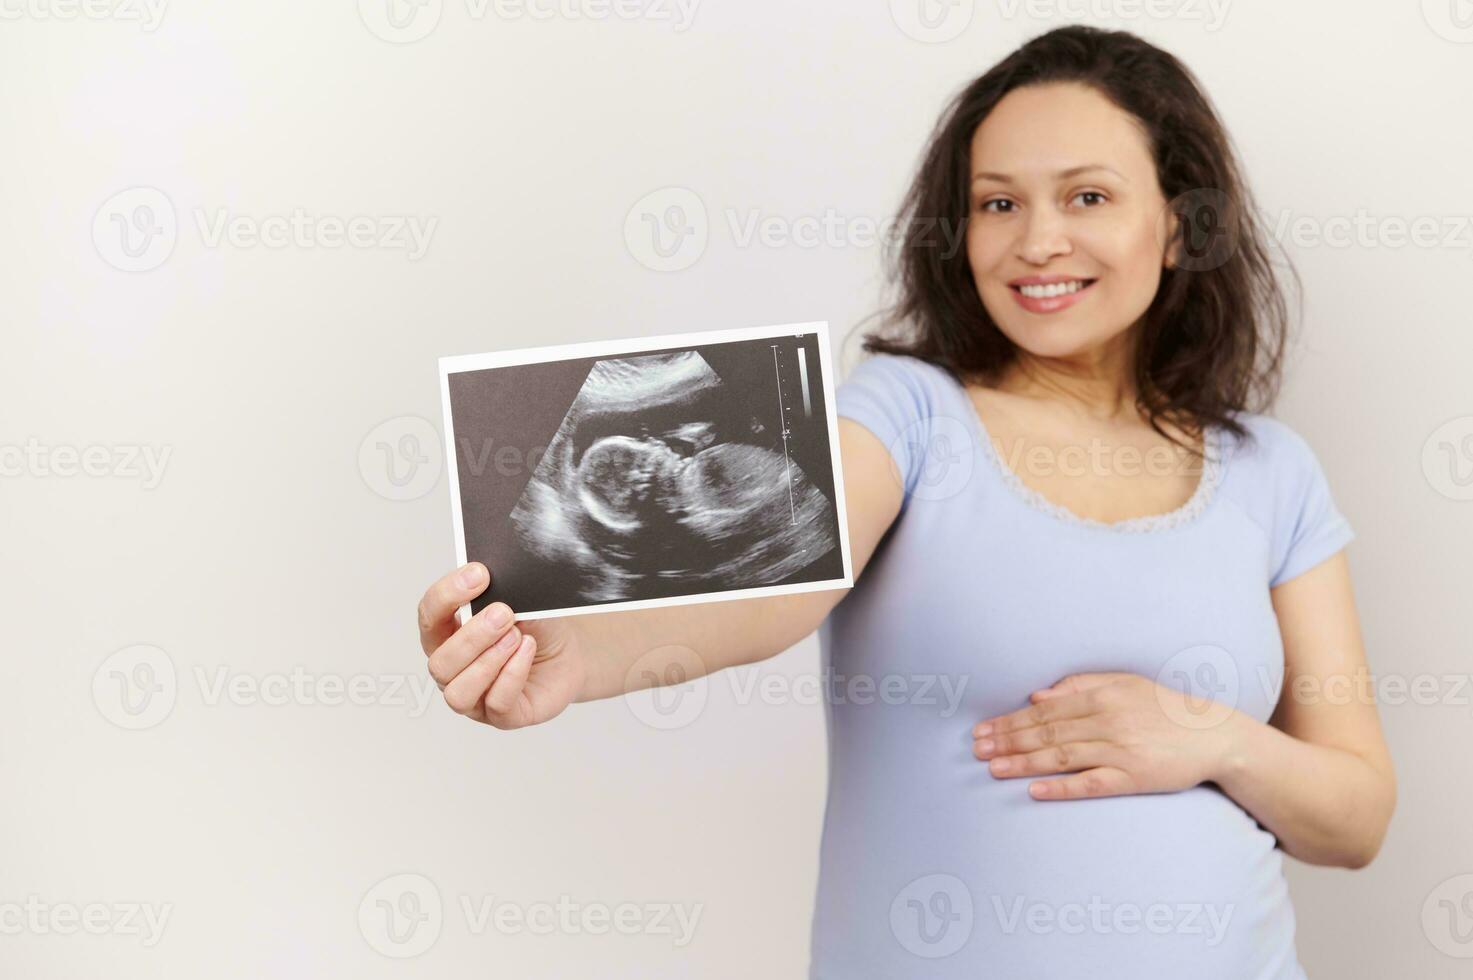 Focus on ultrasound scan image, baby sonography in the hand of a smiling pregnant woman, isolated on white background photo